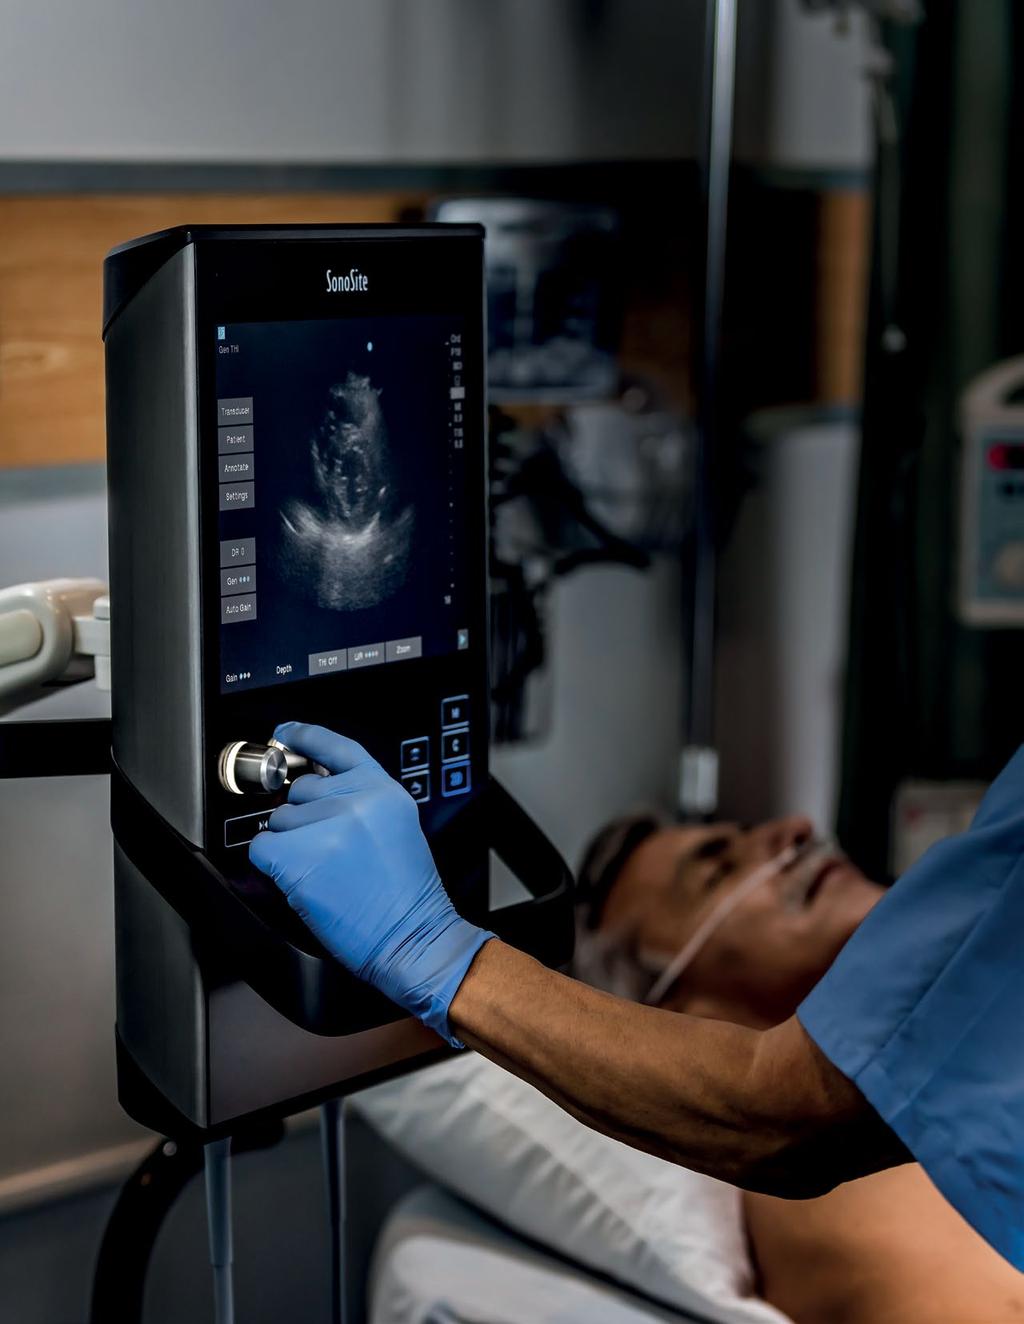 TRANSFORMING THE PACE OF YOUR PRACTICE, THROUGH SIMPLY, SMART ULTRASOUND. The SII empowers your efficiency through an intuitive, yet smart user interface that adapts to your imaging needs.